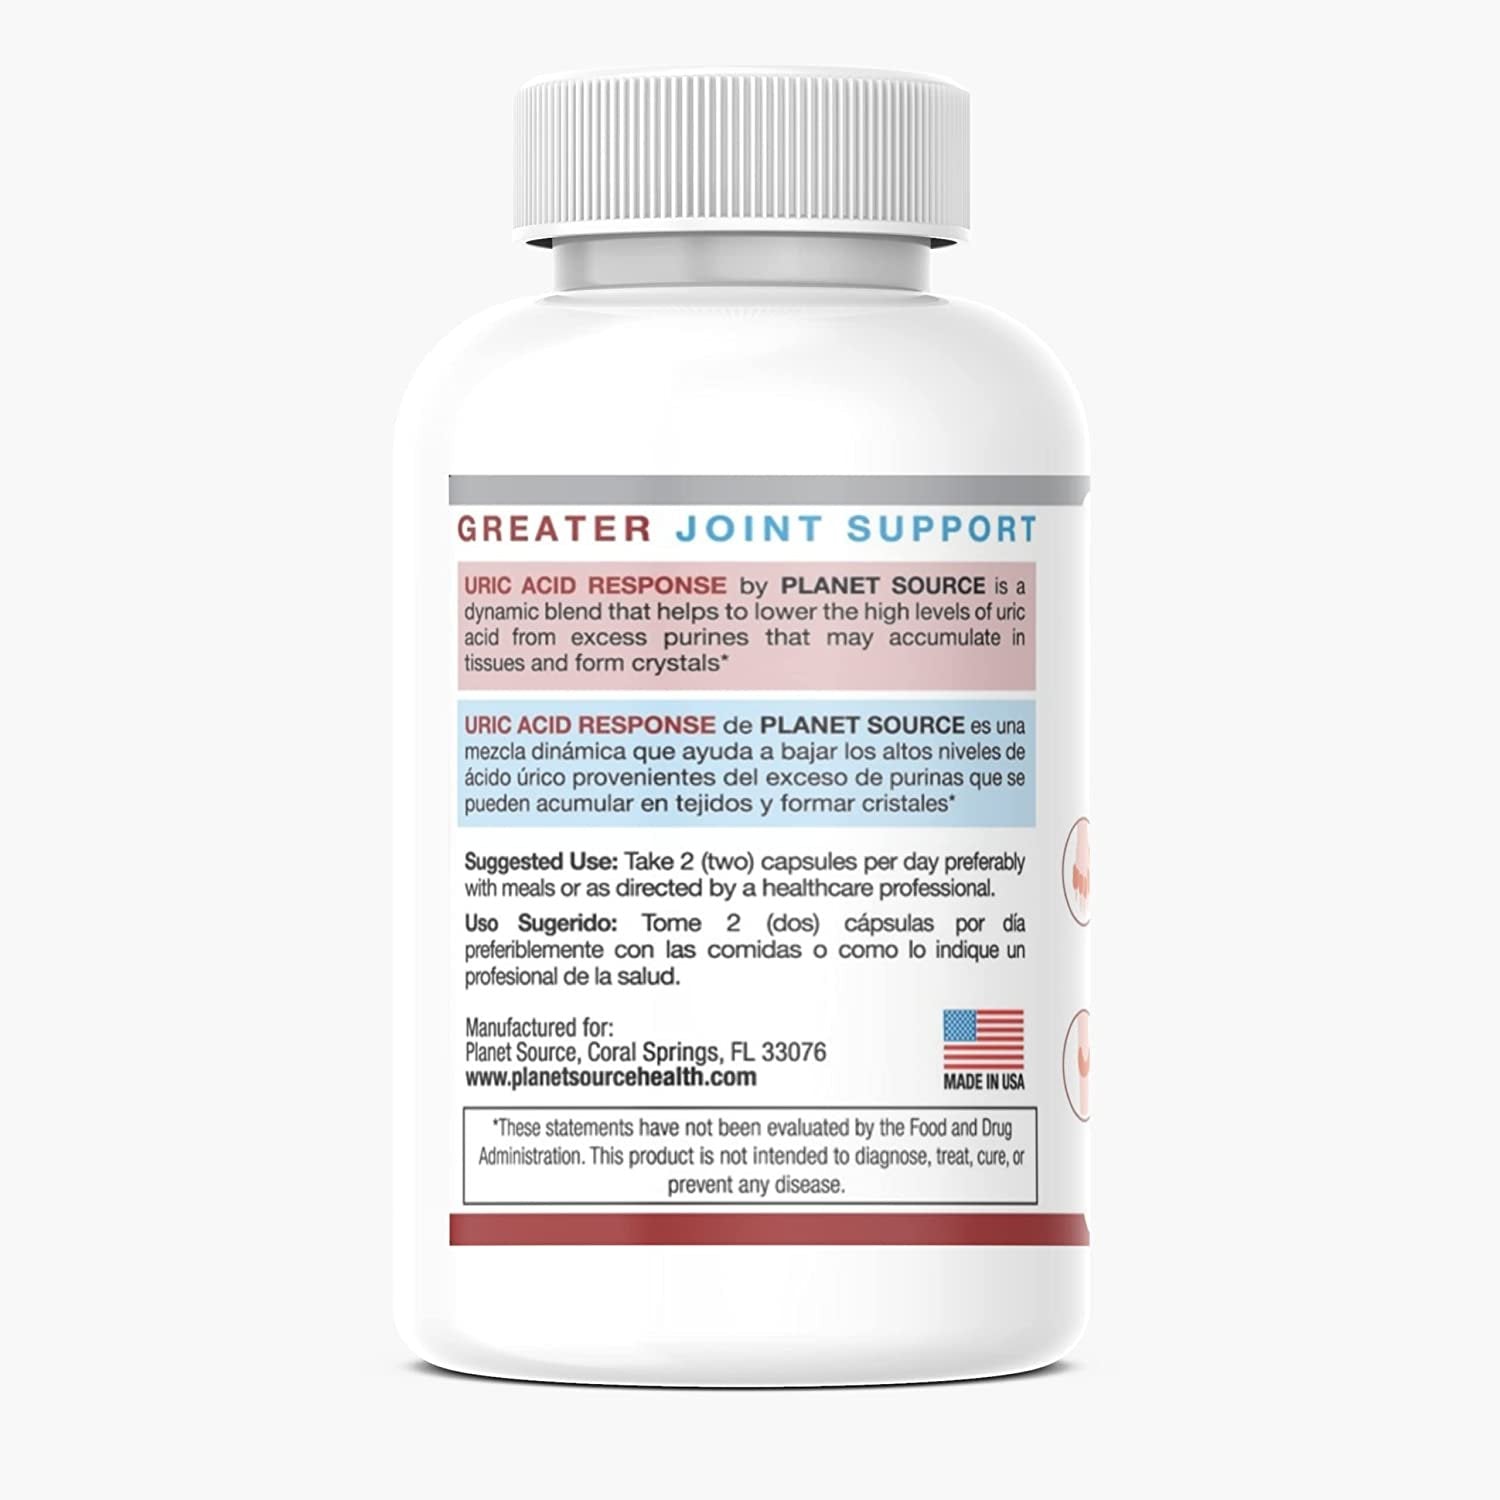 Planet Source Uric Acid Response Dietary Supplement - 60 Count Capsules 30 Servings Per Container - Uric Acid Cleanse Supplement for Kidney and Joint Support - Gluten Free, Vegan Friendly